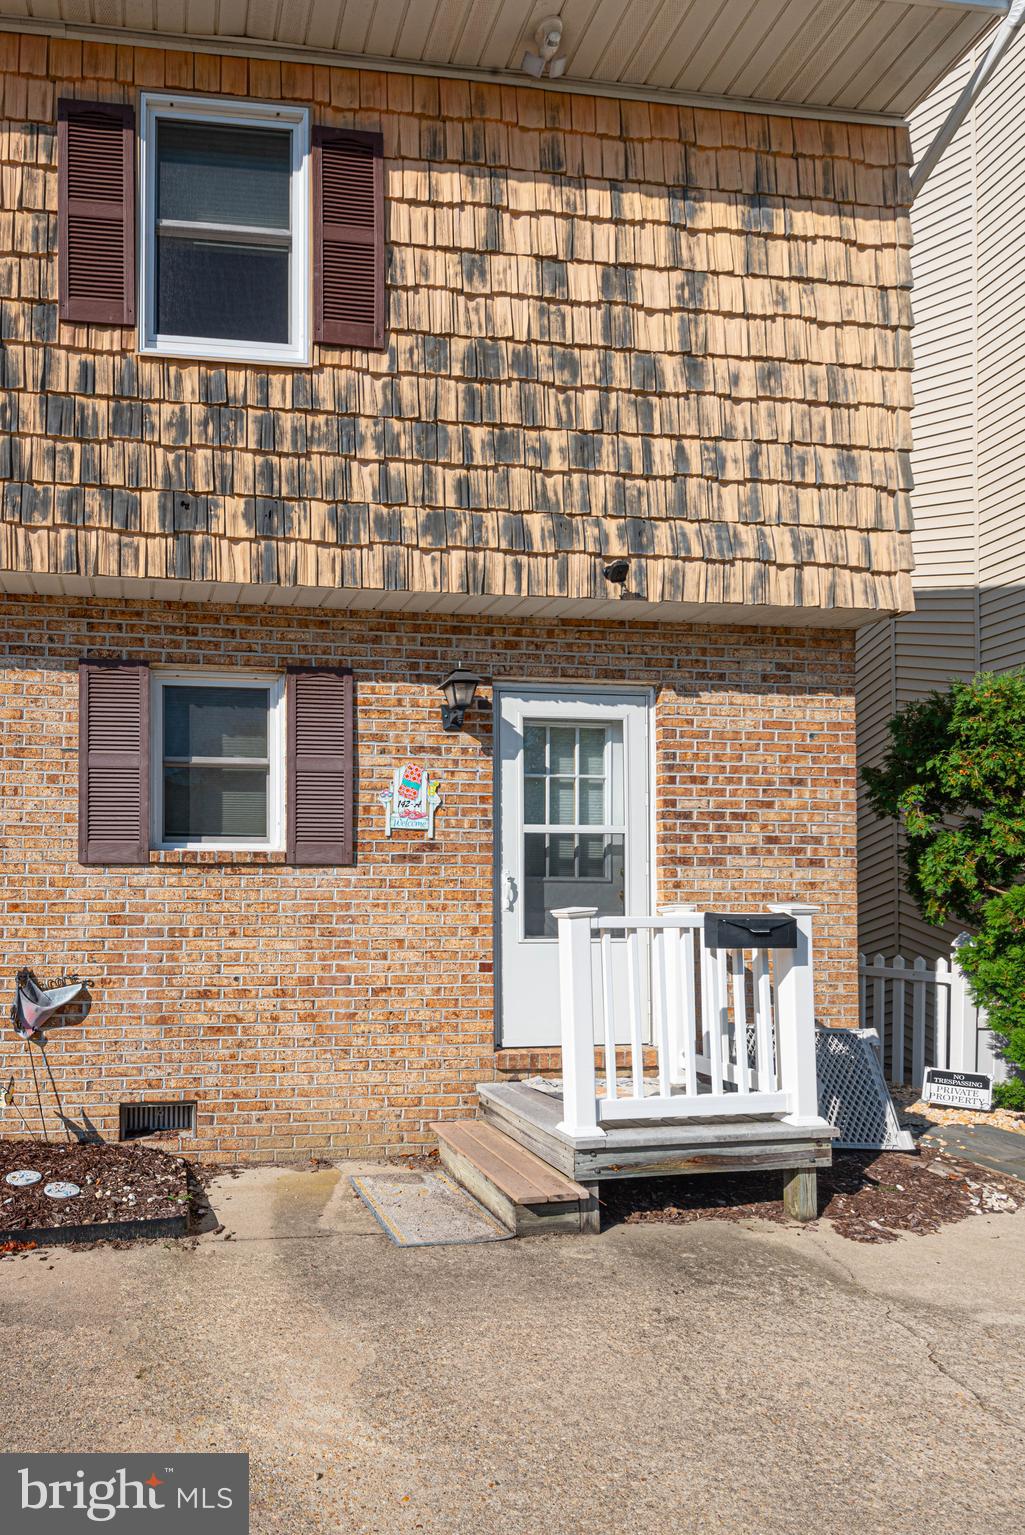 End-of-group townhouse with deeded boat slip on the canal.  Two large bedrooms with full bathrooms on 2nd floor. Half bath on 1st floor. No condo fees. Full-size washer/ dryer on 2nd floor where bedrooms are located. Sold as-is.